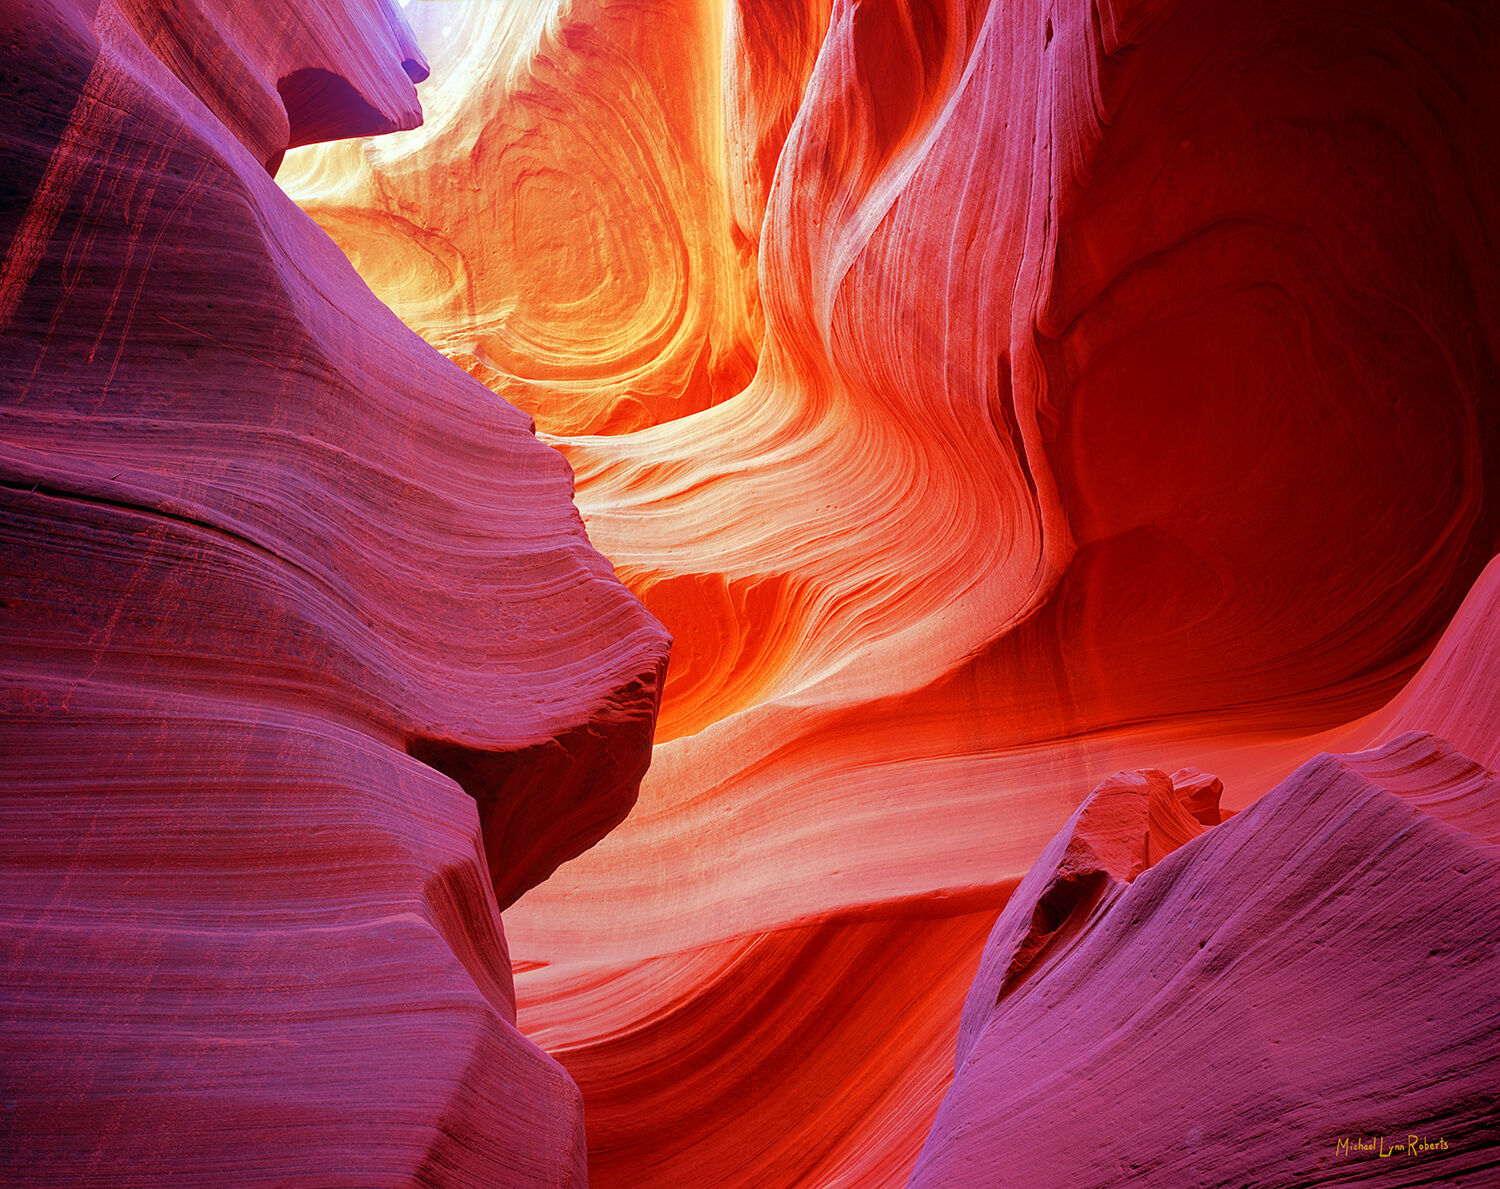 I first photographed this formation in Lower Antelope Canyon in June 2006 on my first visit. I later returned in November and...